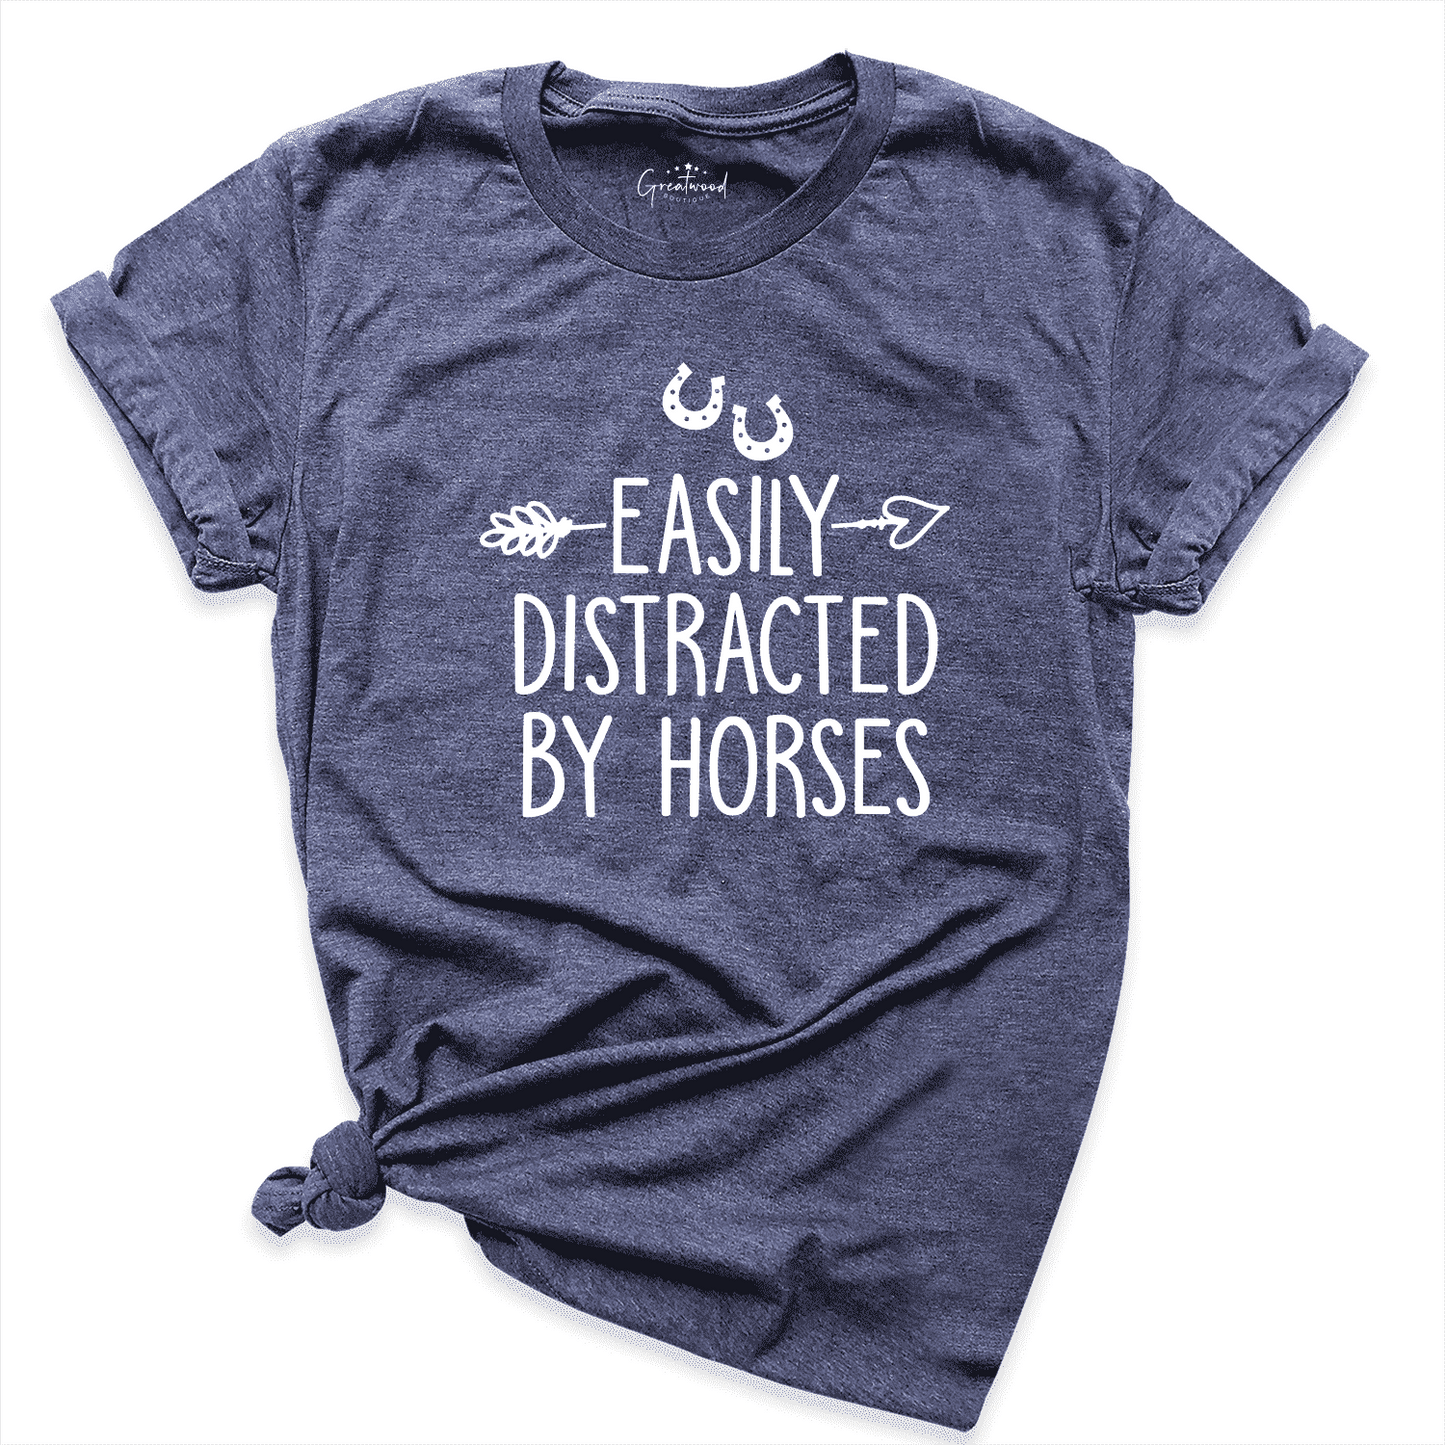 Easily Distracted By Horses Shirt Navy - Greatwood Boutique